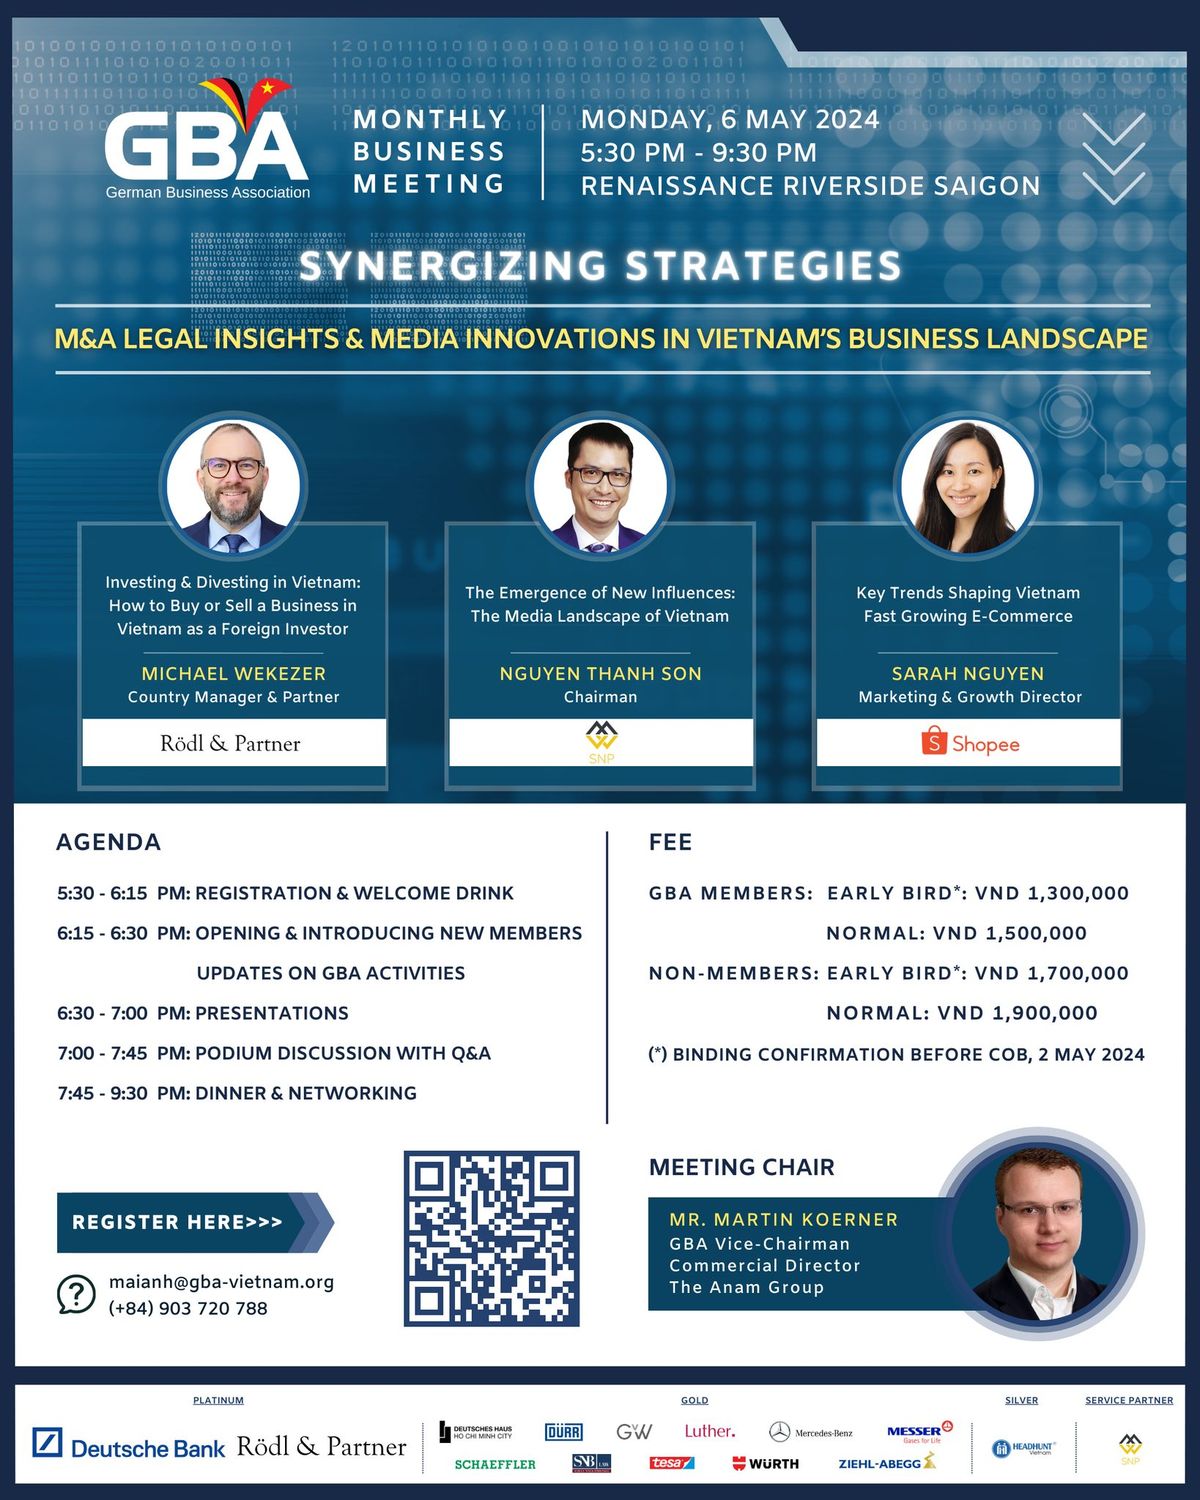 GBA Business Meeting in May